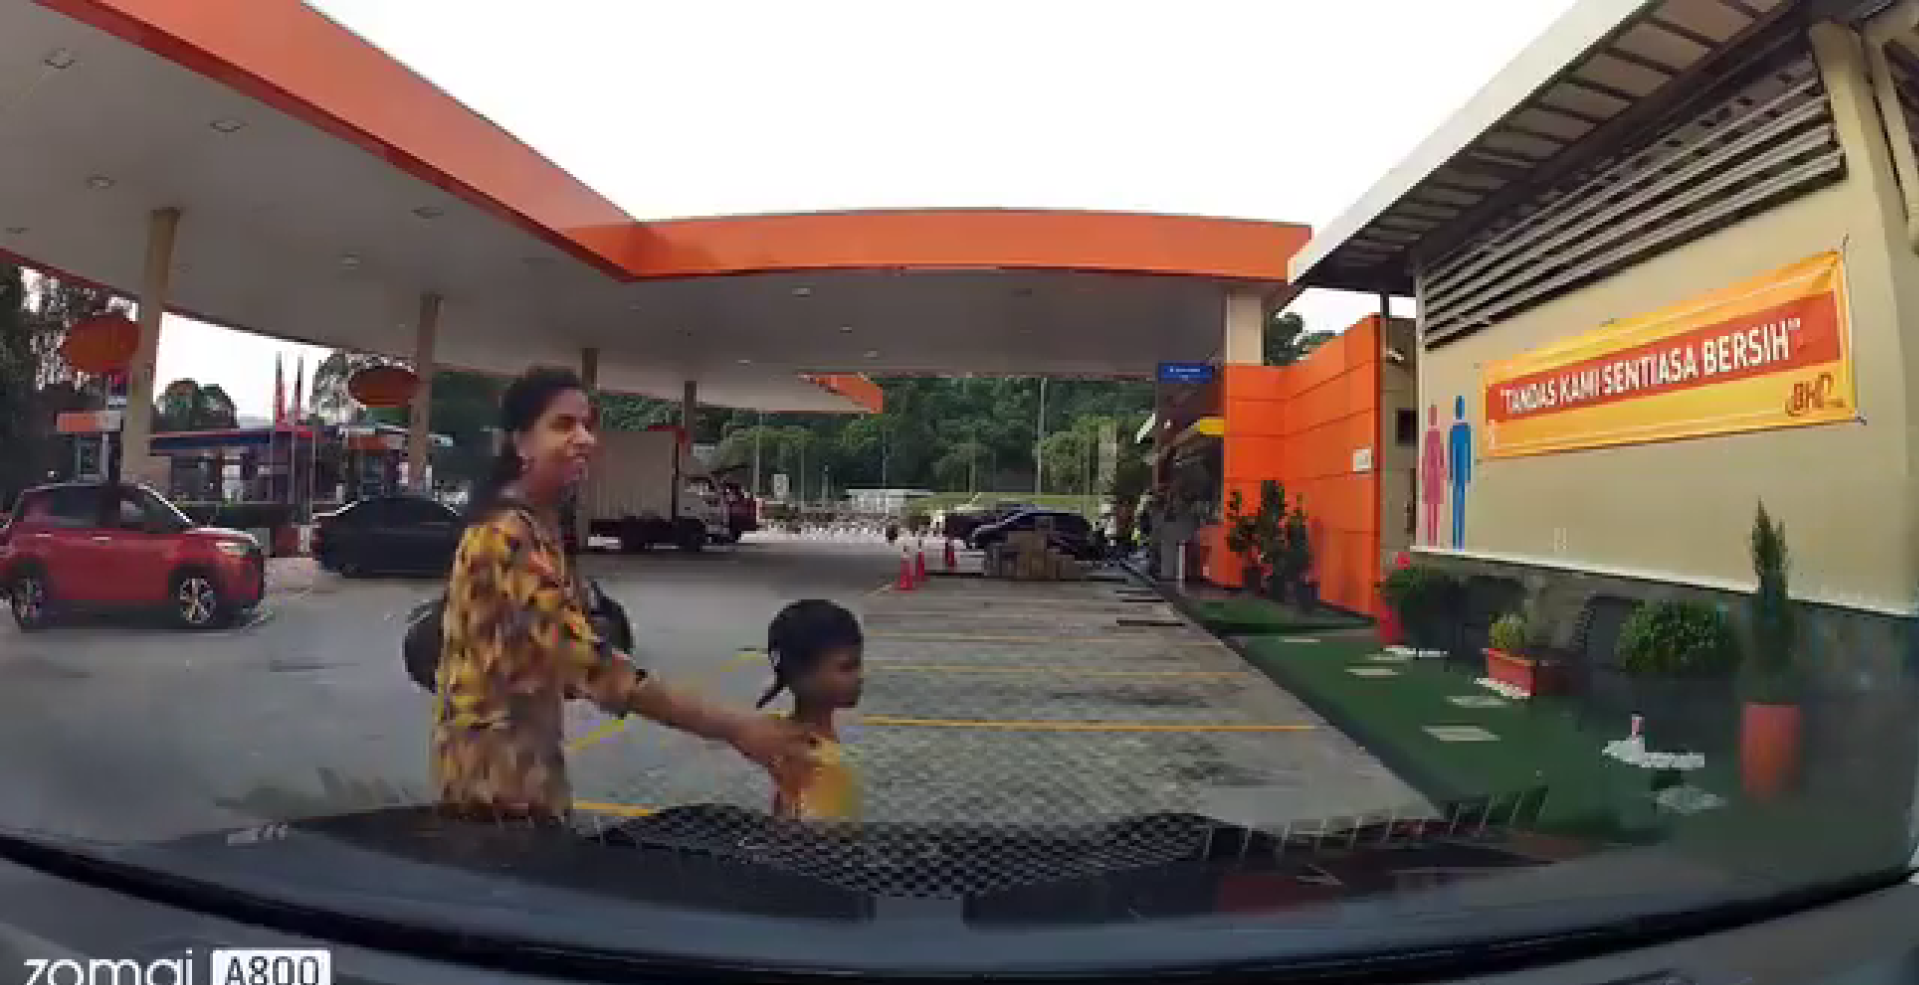 Mother and son walking in front of a car